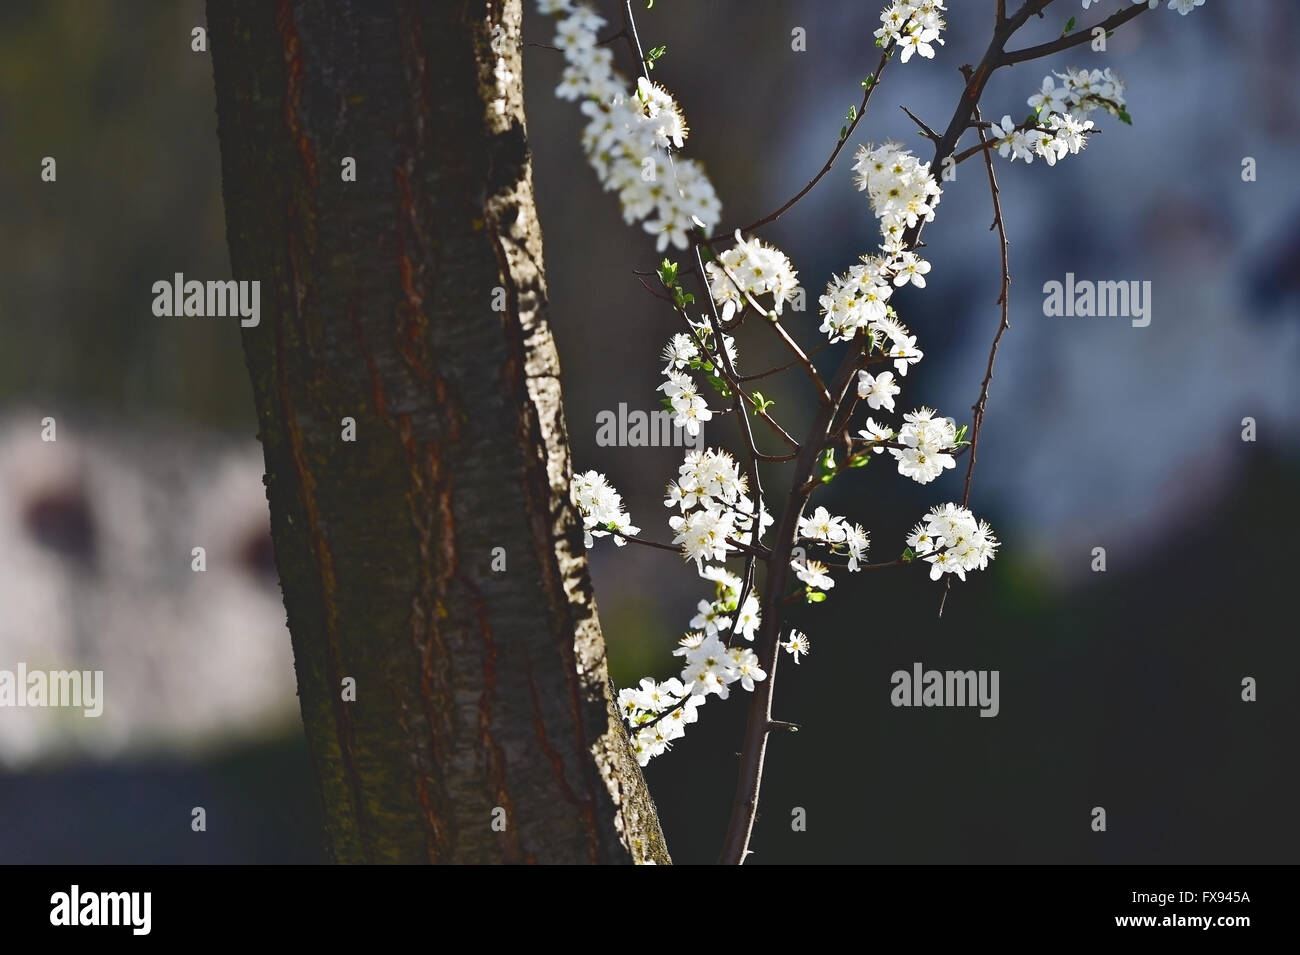 Blooming white cherry flowers on a tree in springtime with blue sky on background Stock Photo